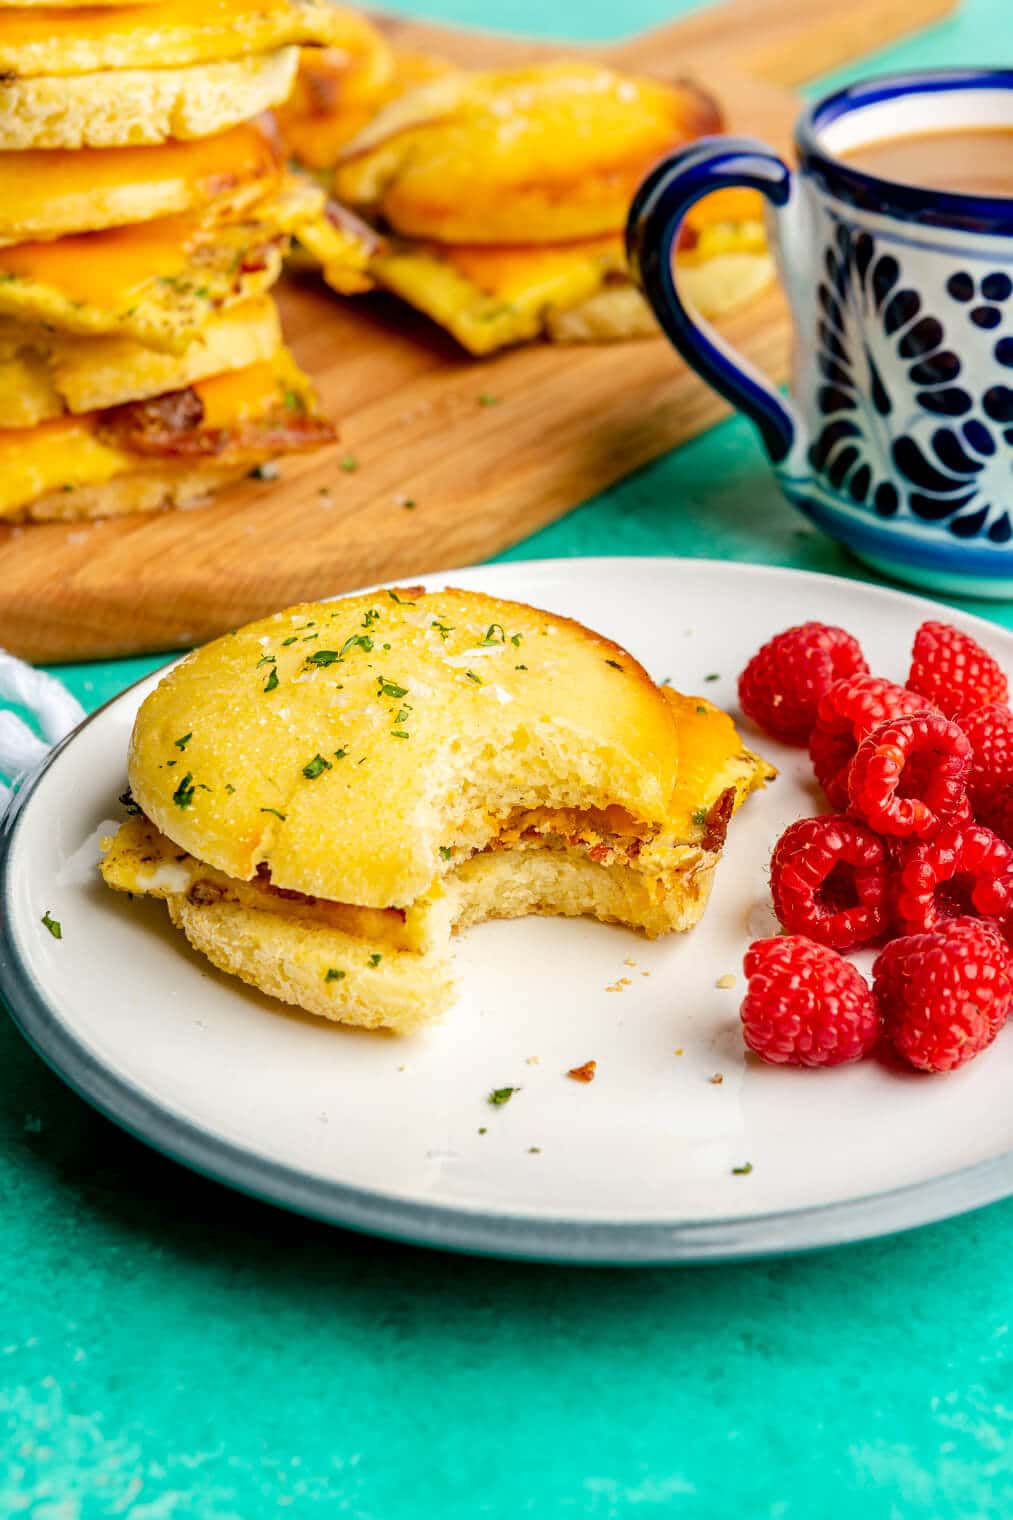 Breakfast sandwich on a plate with a side of raspberries. There is a white and blue mug in the background and a wooden cutting board with other breakfast sandwiches on the board. All are on a teal surface.